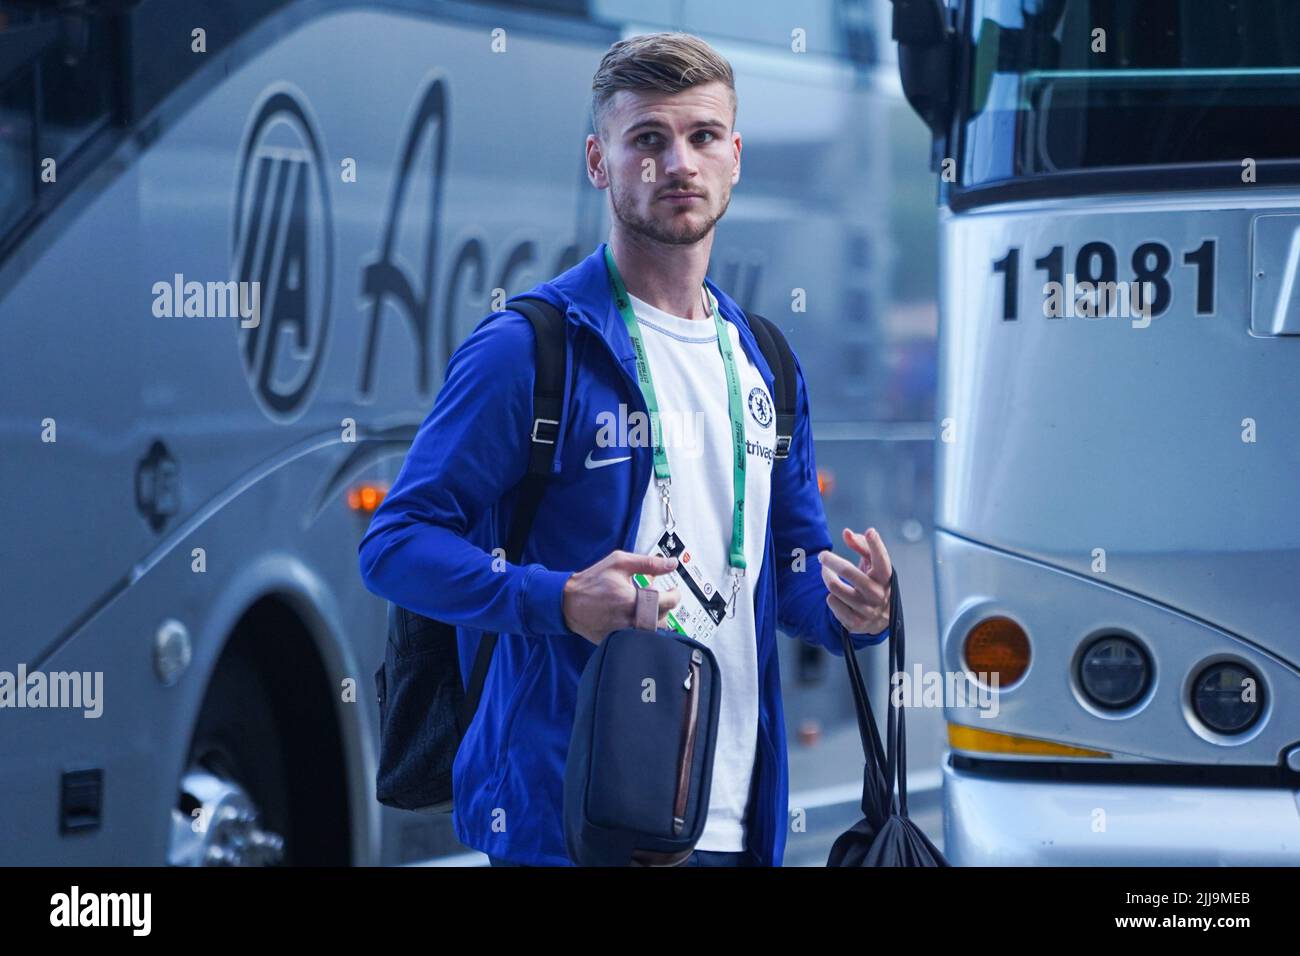 Orlando, Florida, USA, July 23, 2022, Chelsea player Timo Werner #11 arriving at Camping World Stadium in a Friendly Match.  (Photo Credit:  Marty Jean-Louis) Stock Photo